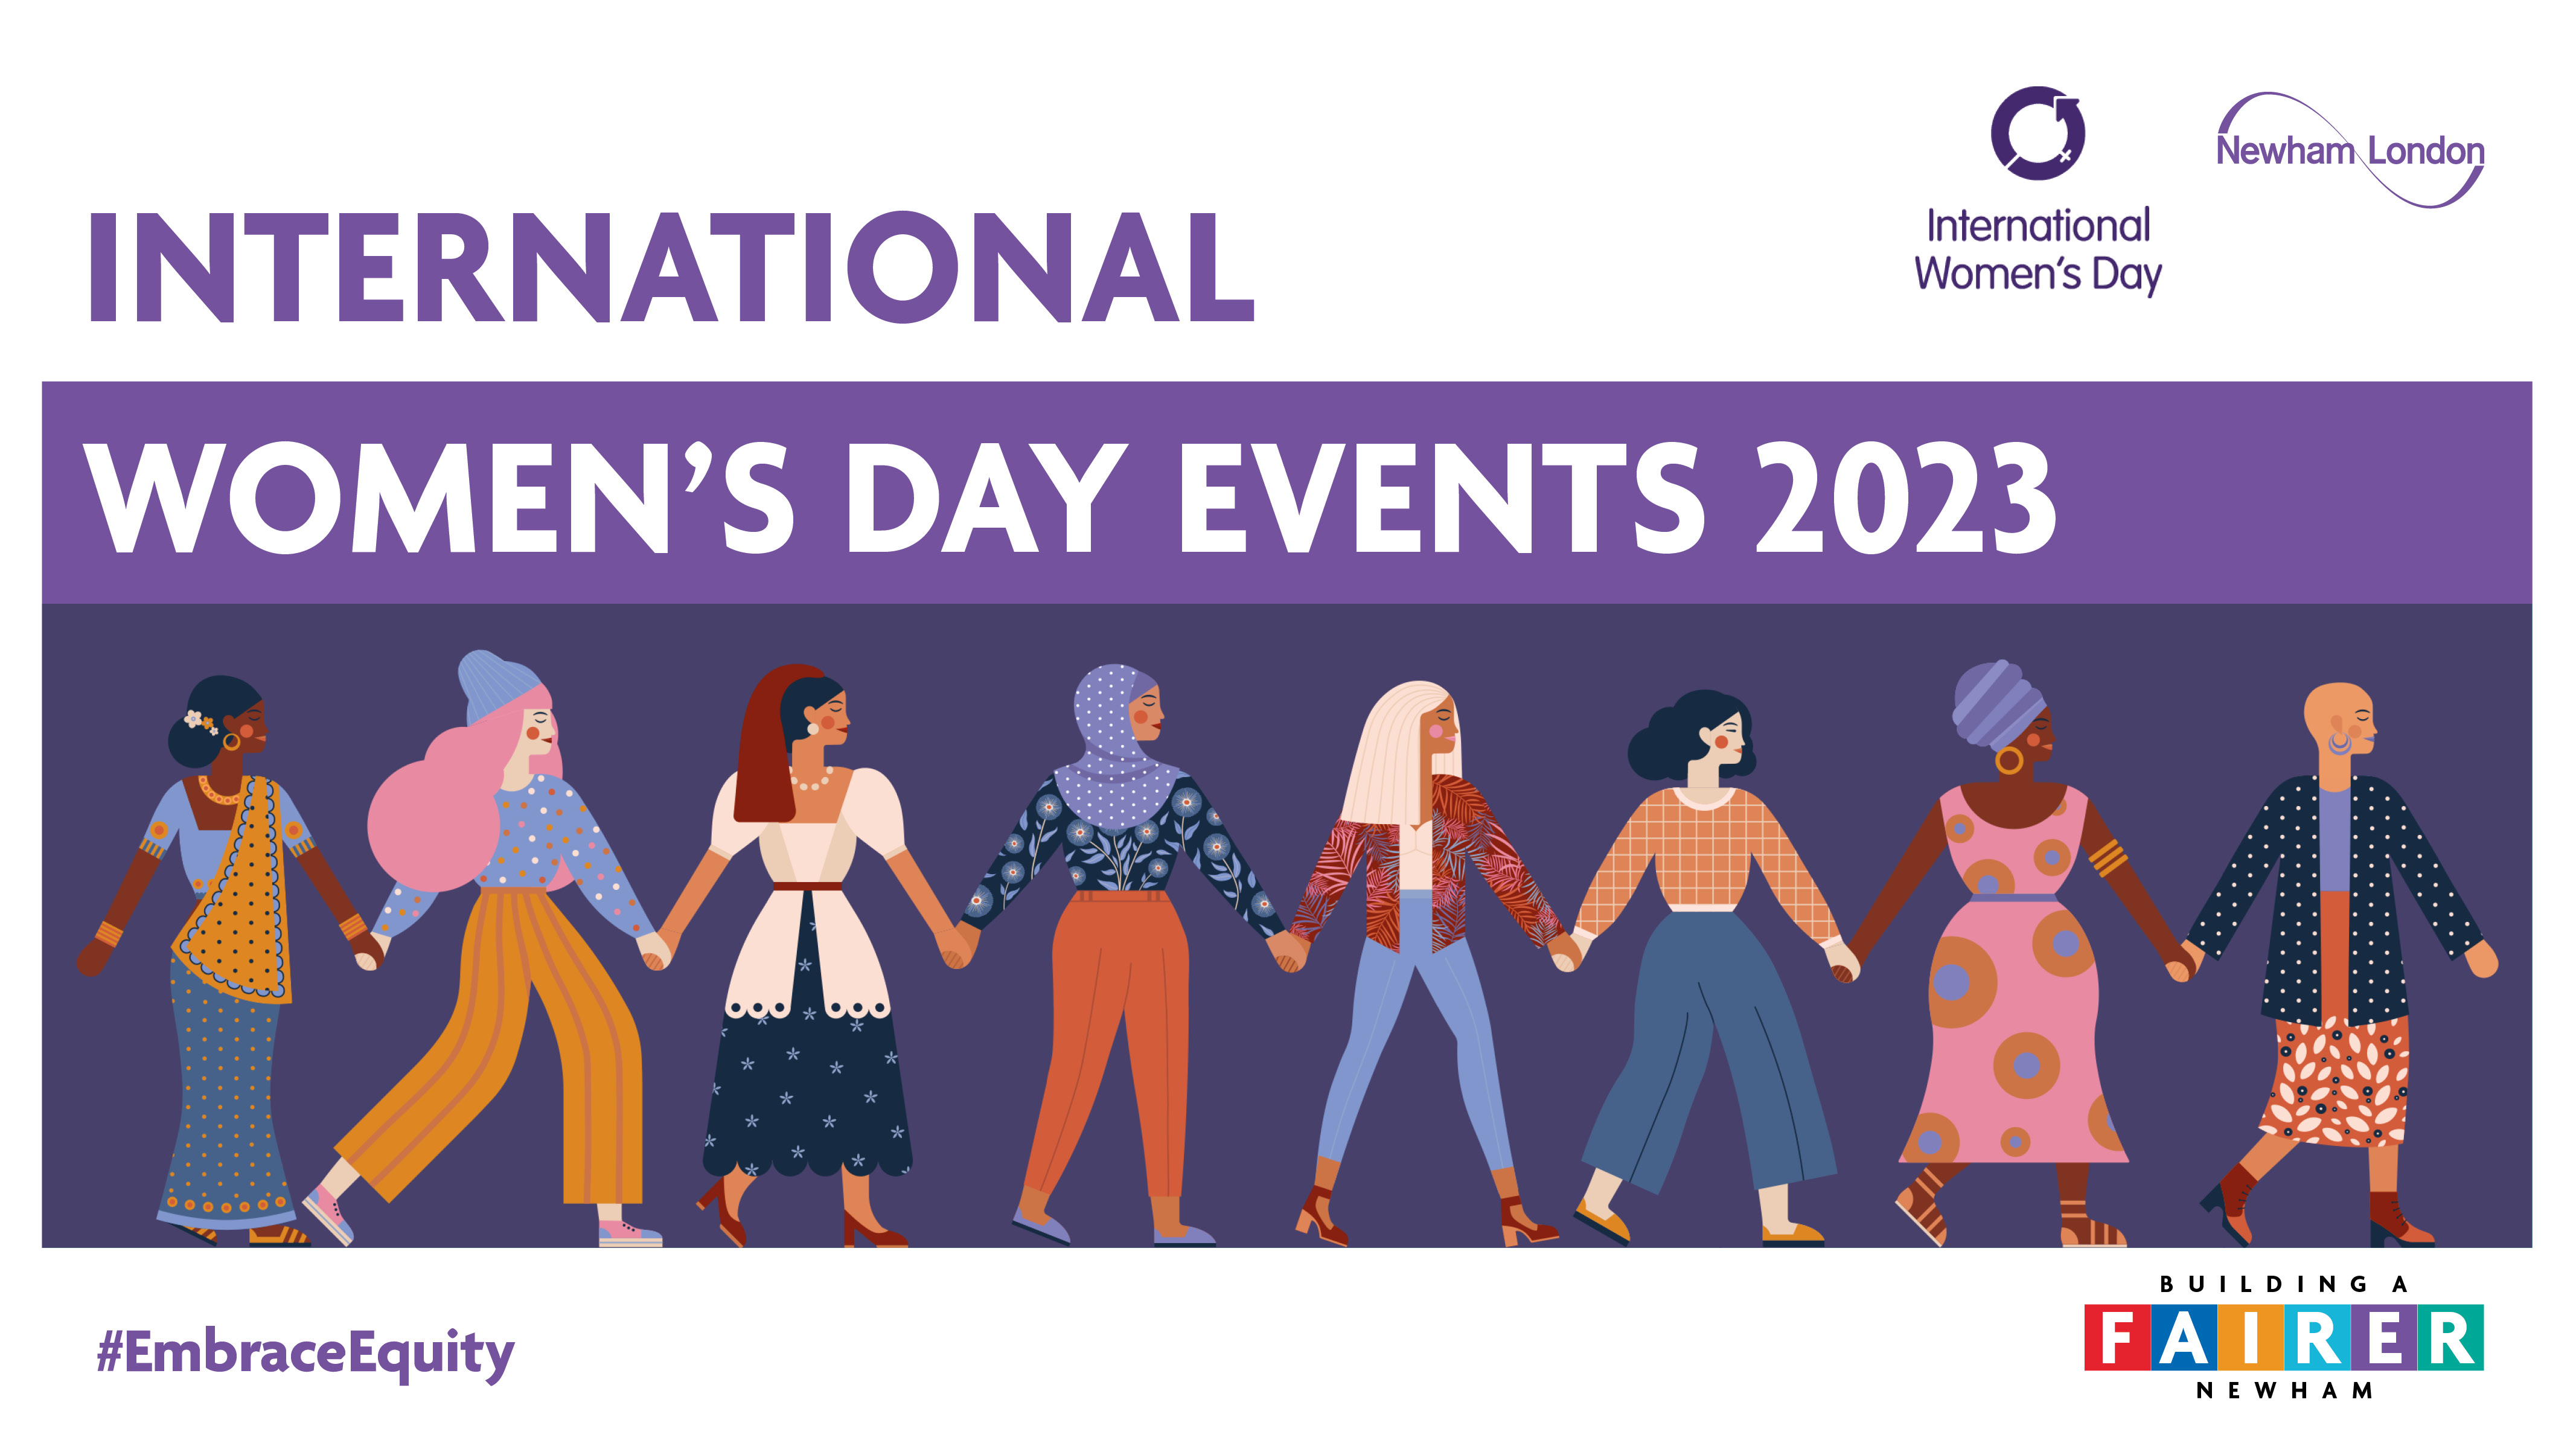 international-women-s-day-events-2023-newham-council